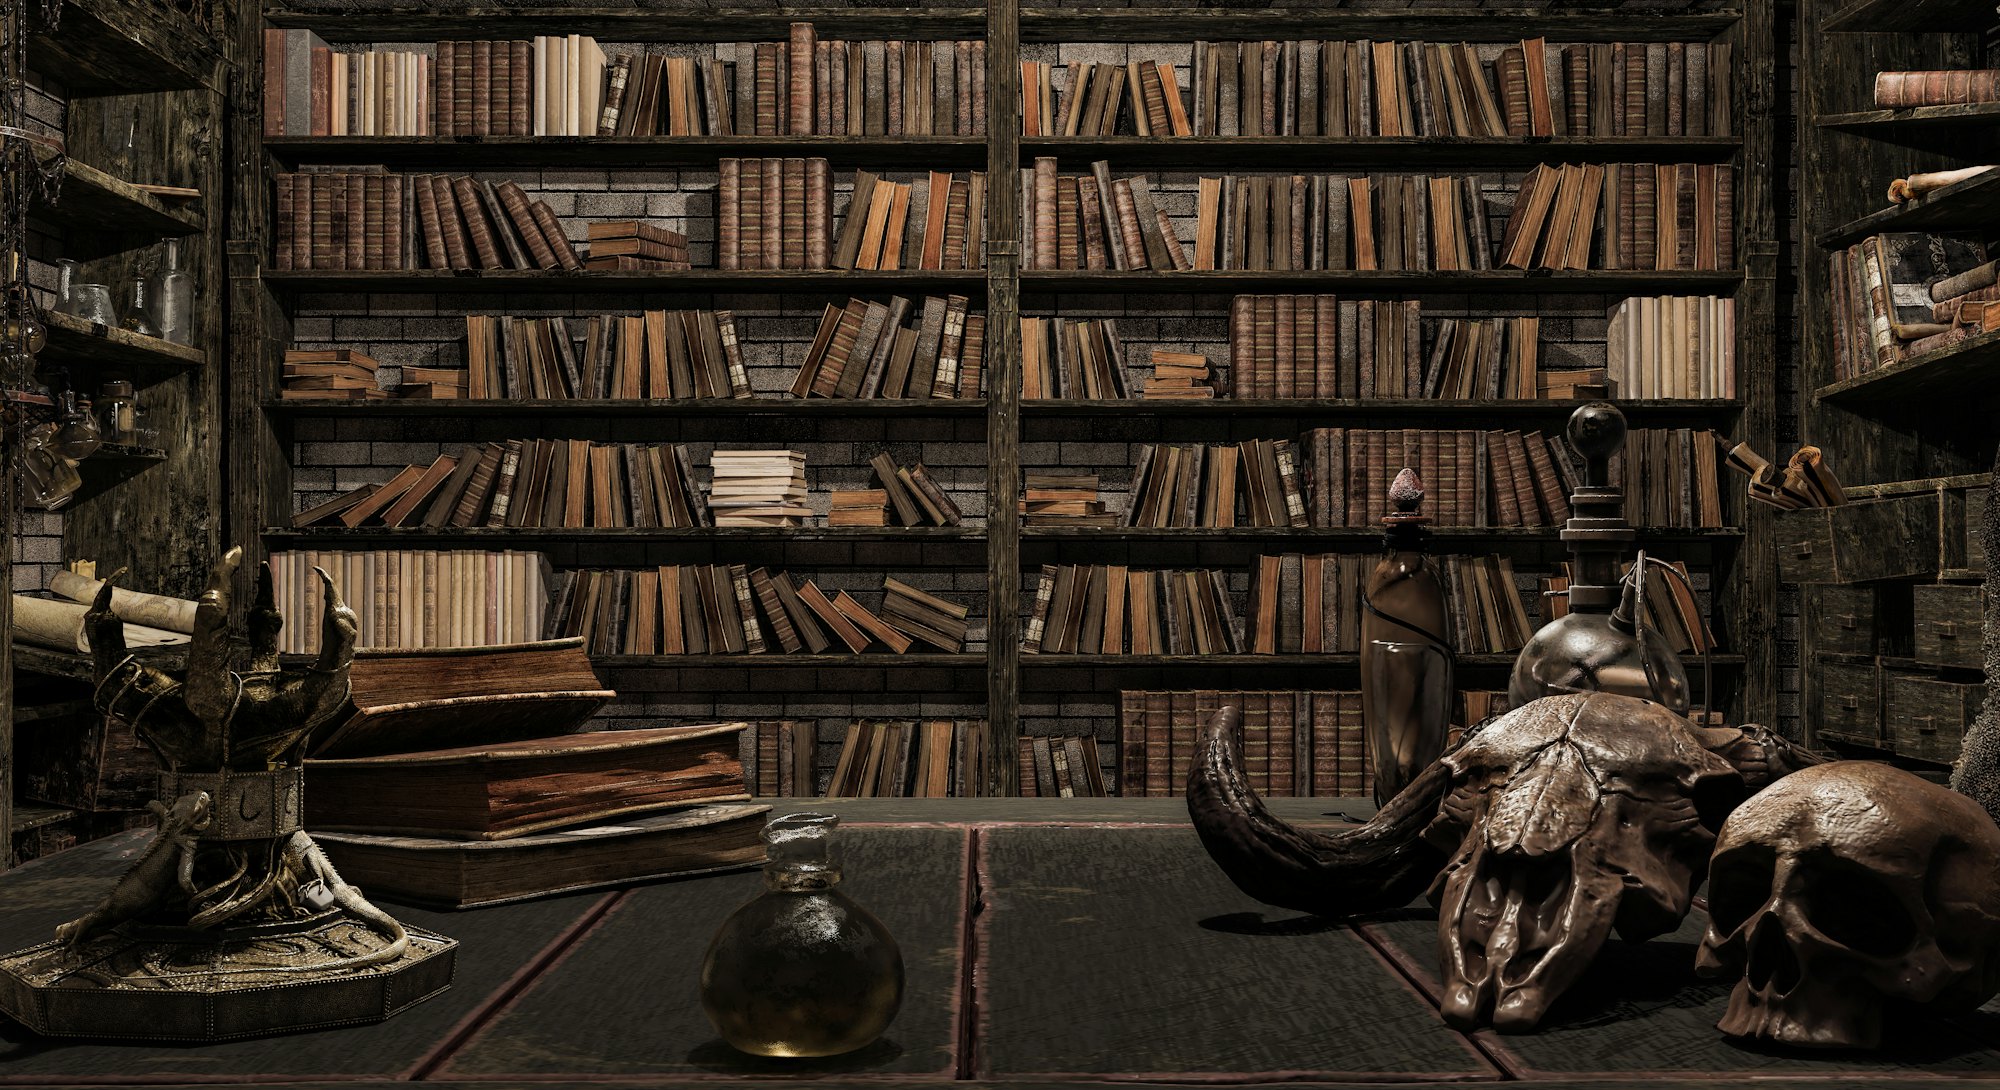 the wizard's room with library, old books, potion, and scary things 3d render 3d illustration